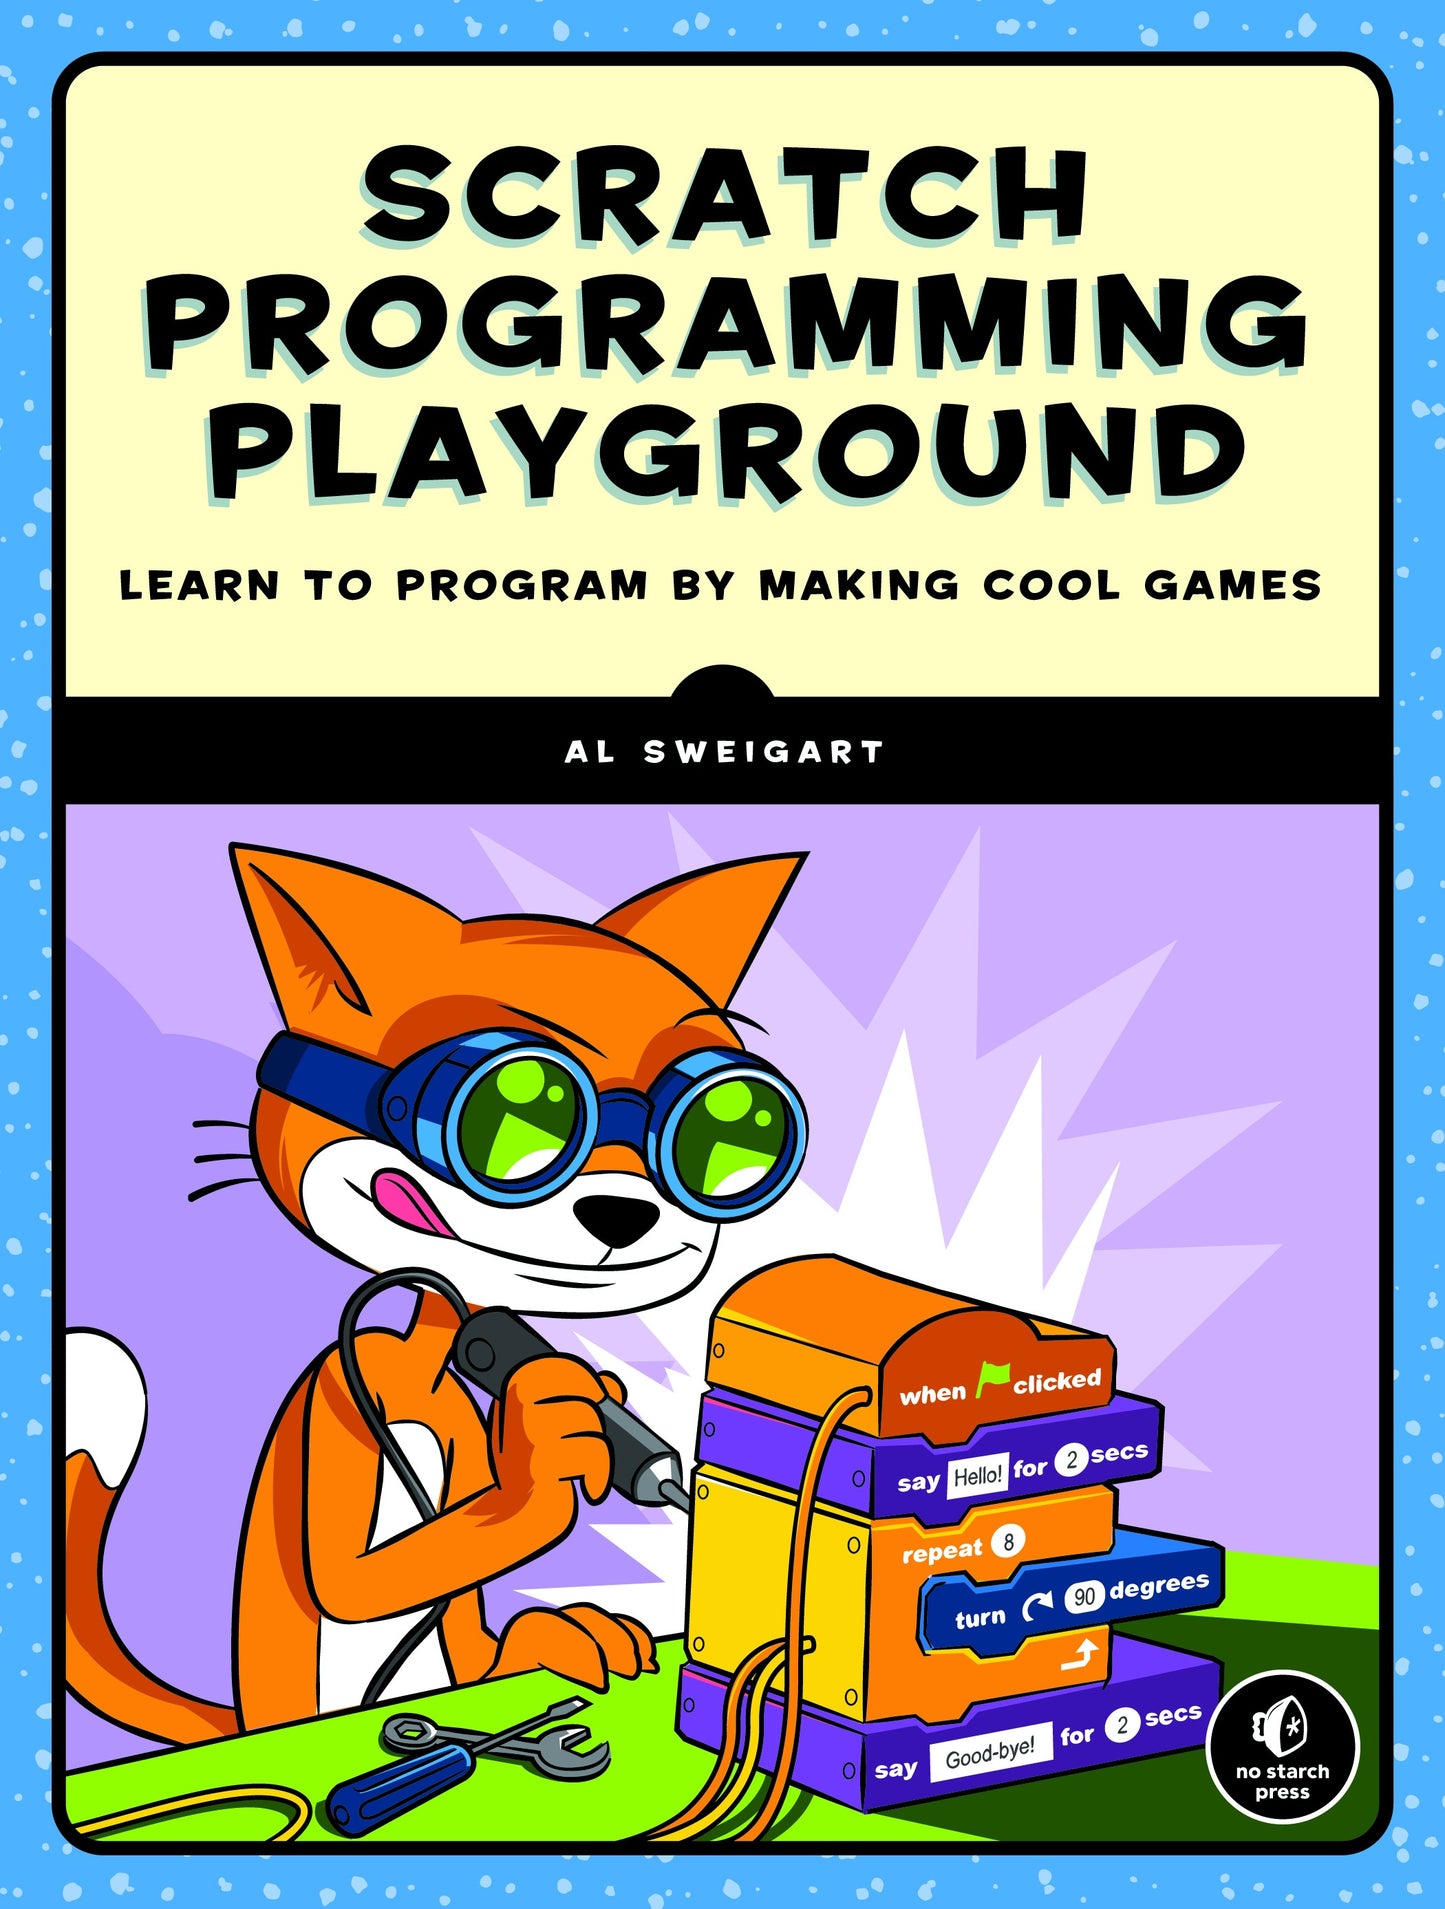 Scratch programming, coding for beginners, interactive coding projects, game development, coding challenges, computer science education, Digital Technology Book, Digital Technology Resource, Computer Science Book, Electronics Book